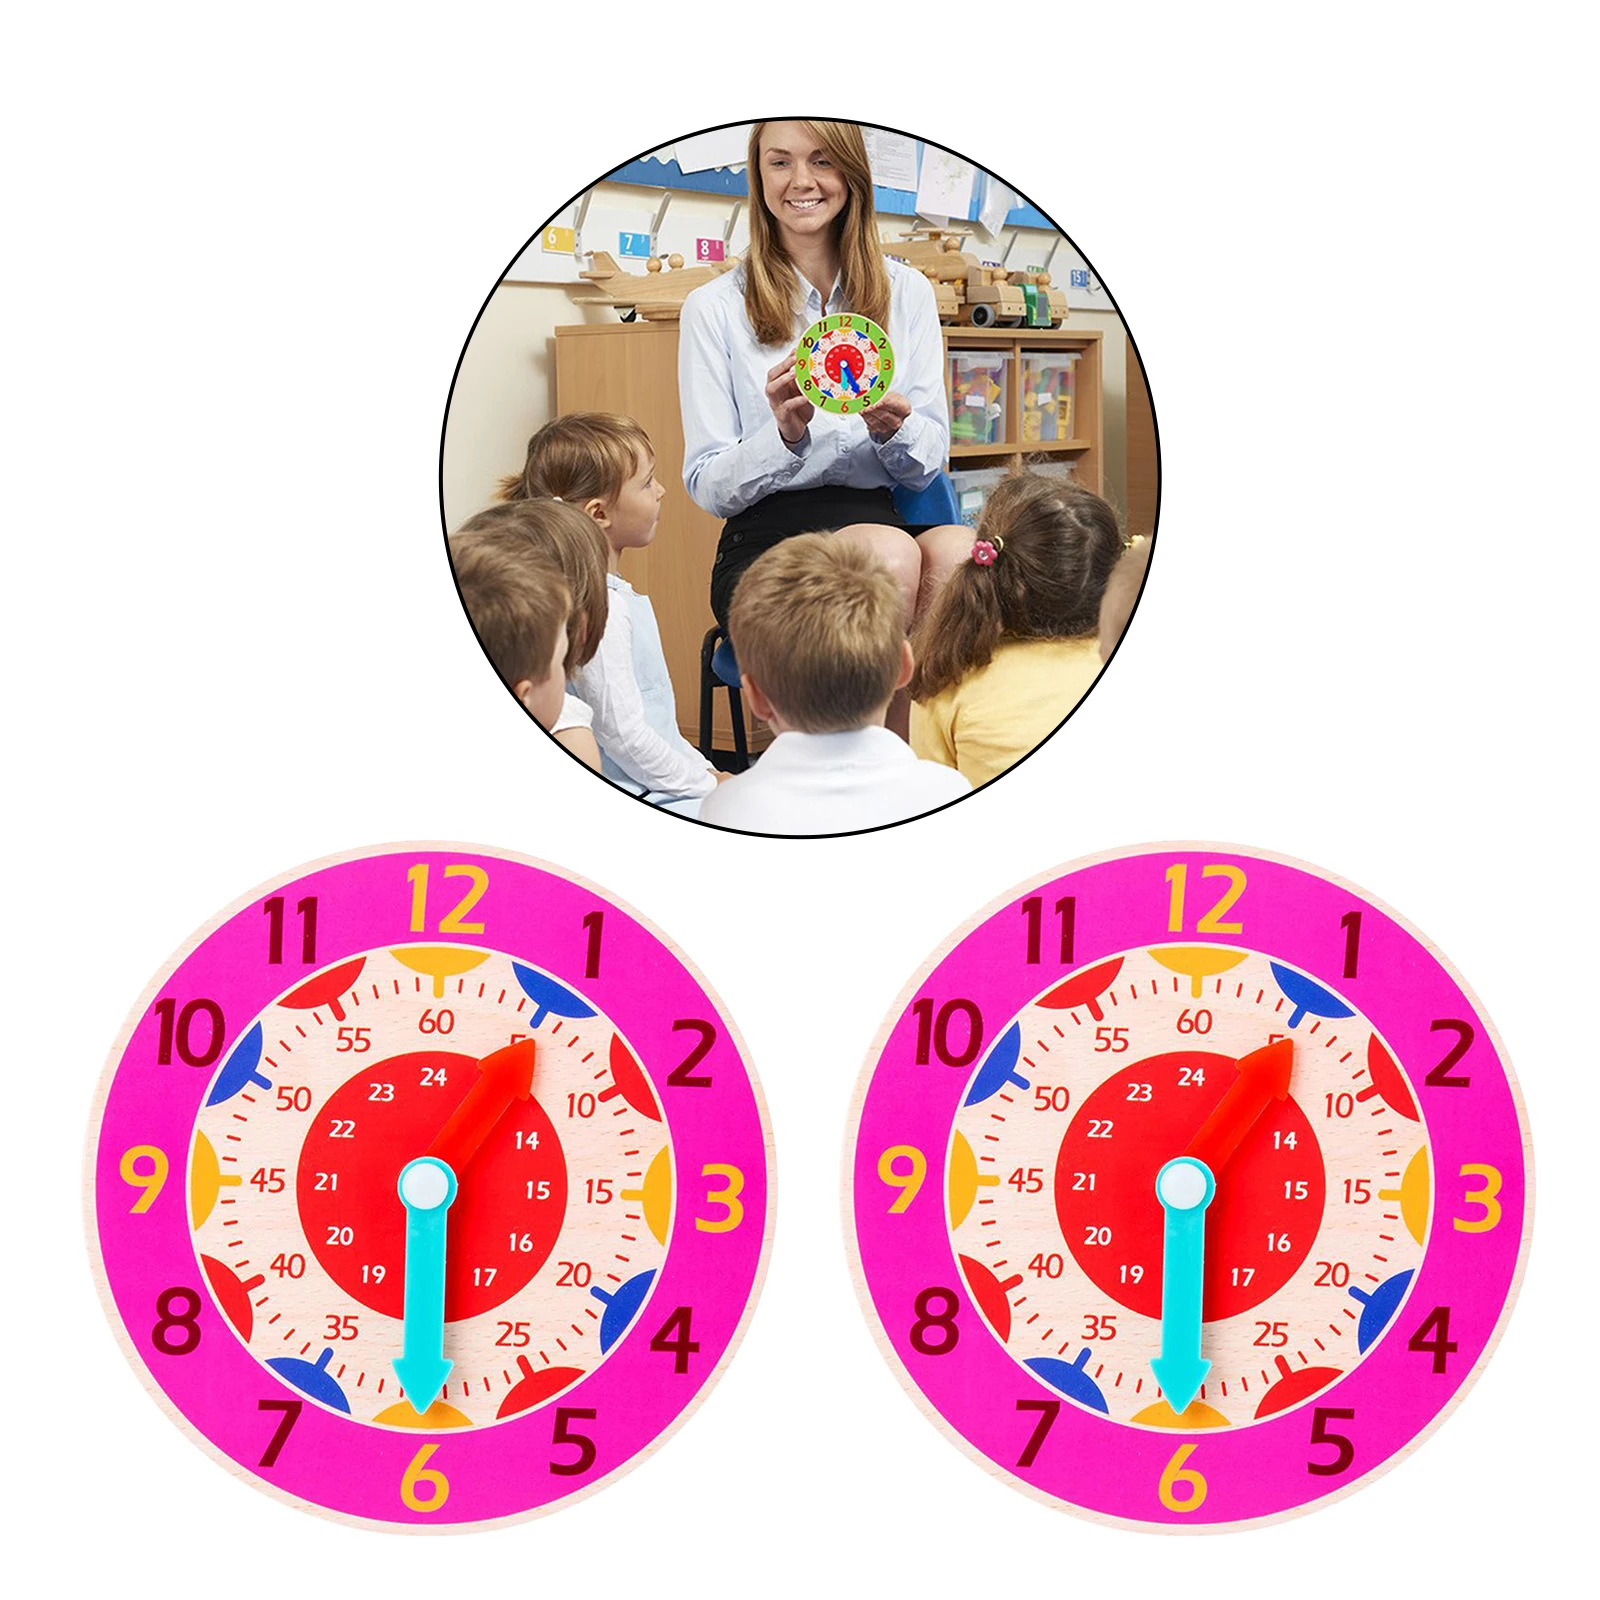 Set of 2 Montessori Wooden Clock Toy Learning Time Teaching Aids for Kids